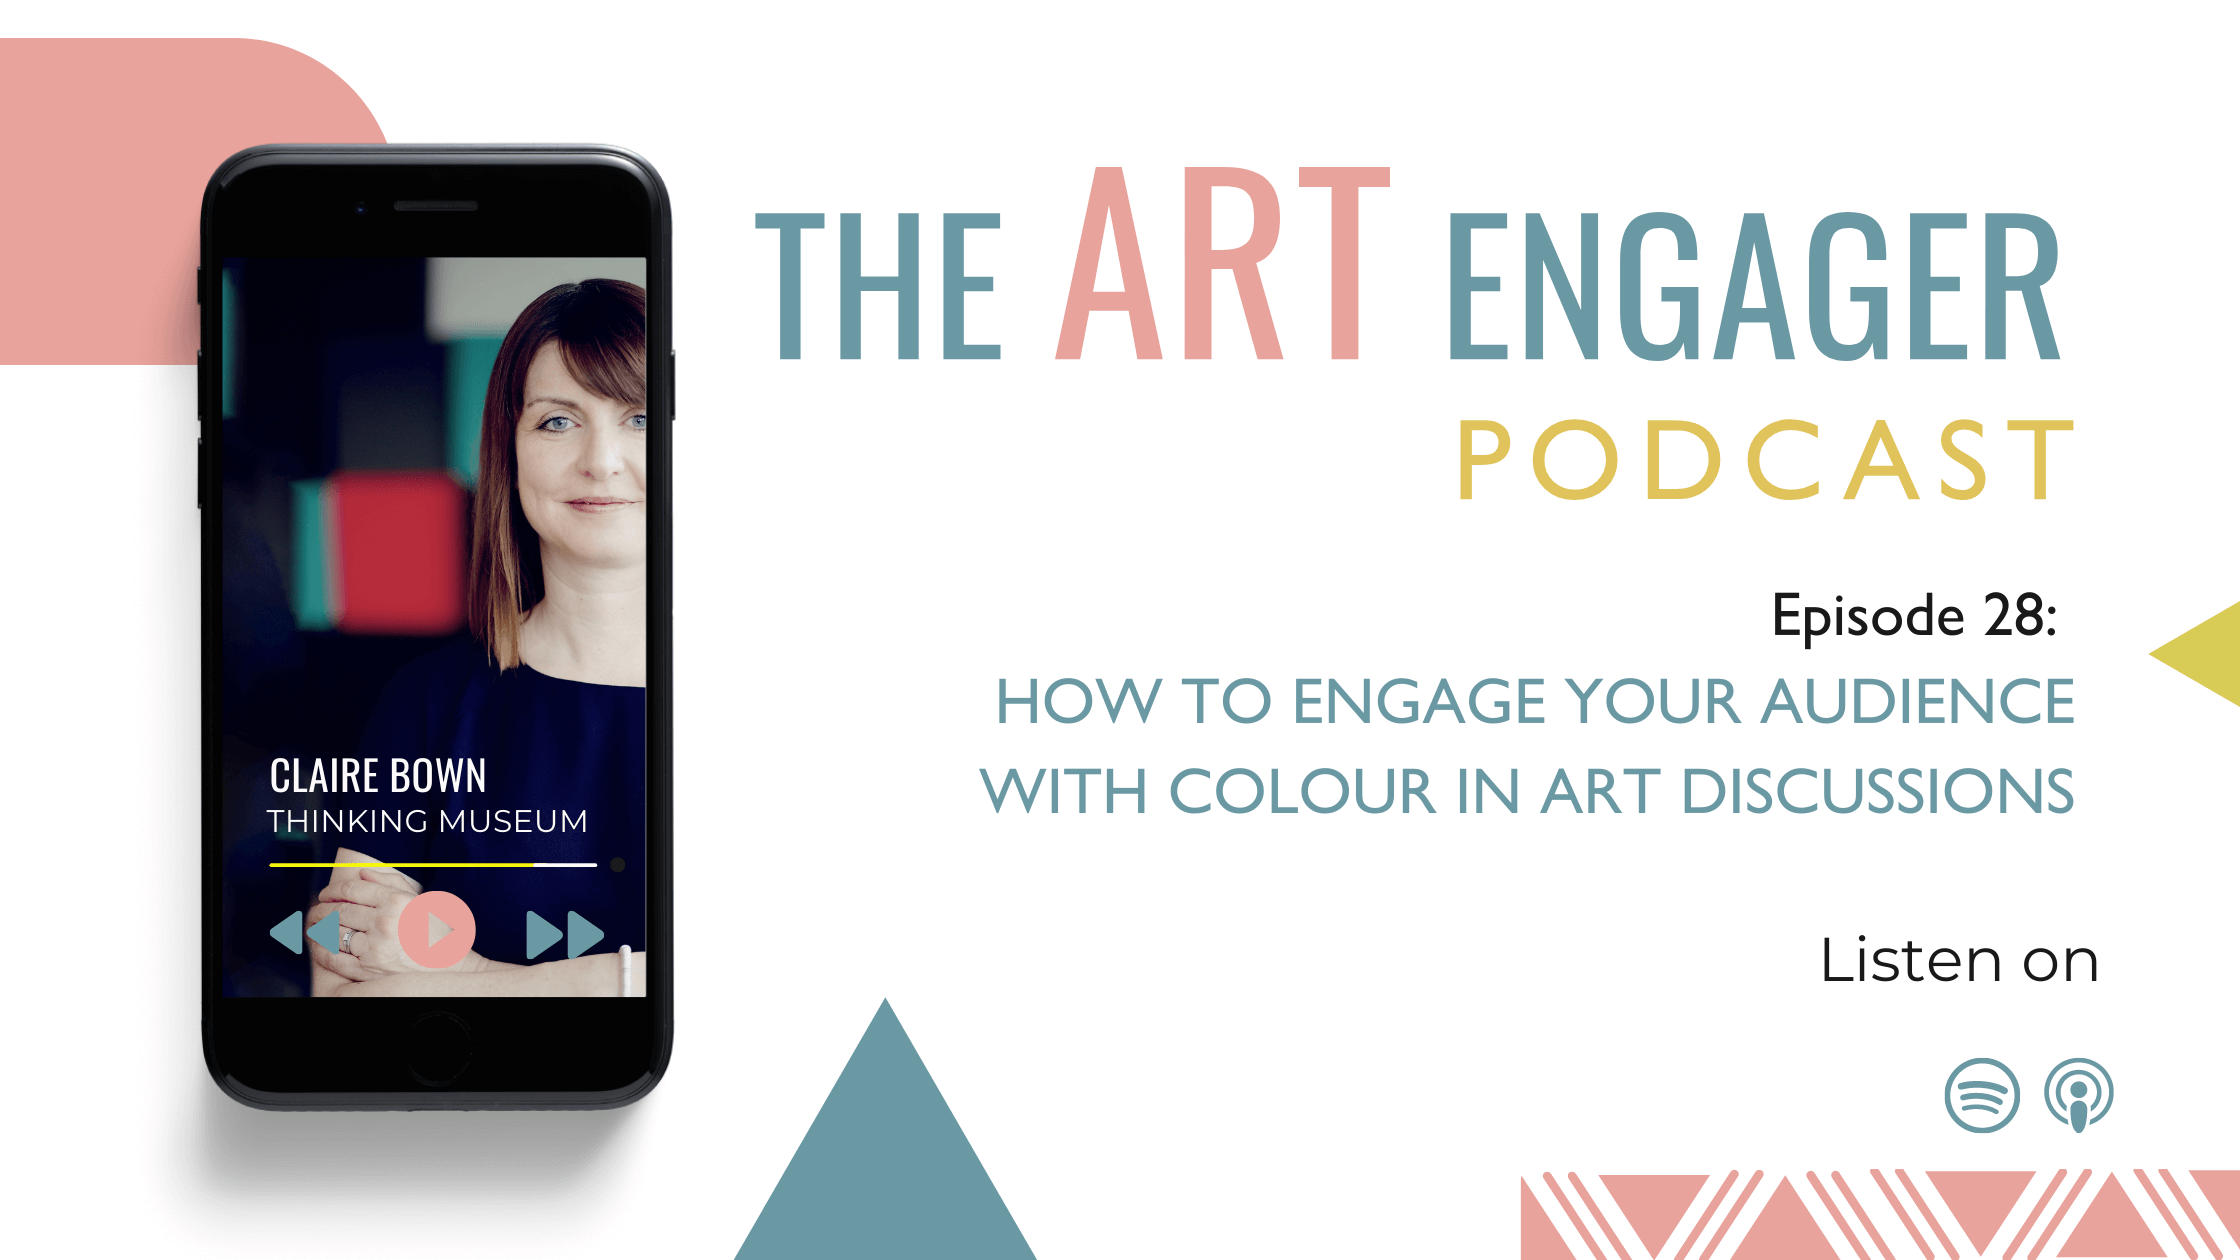 How to Engage your Audience with Colour in Art Discussions